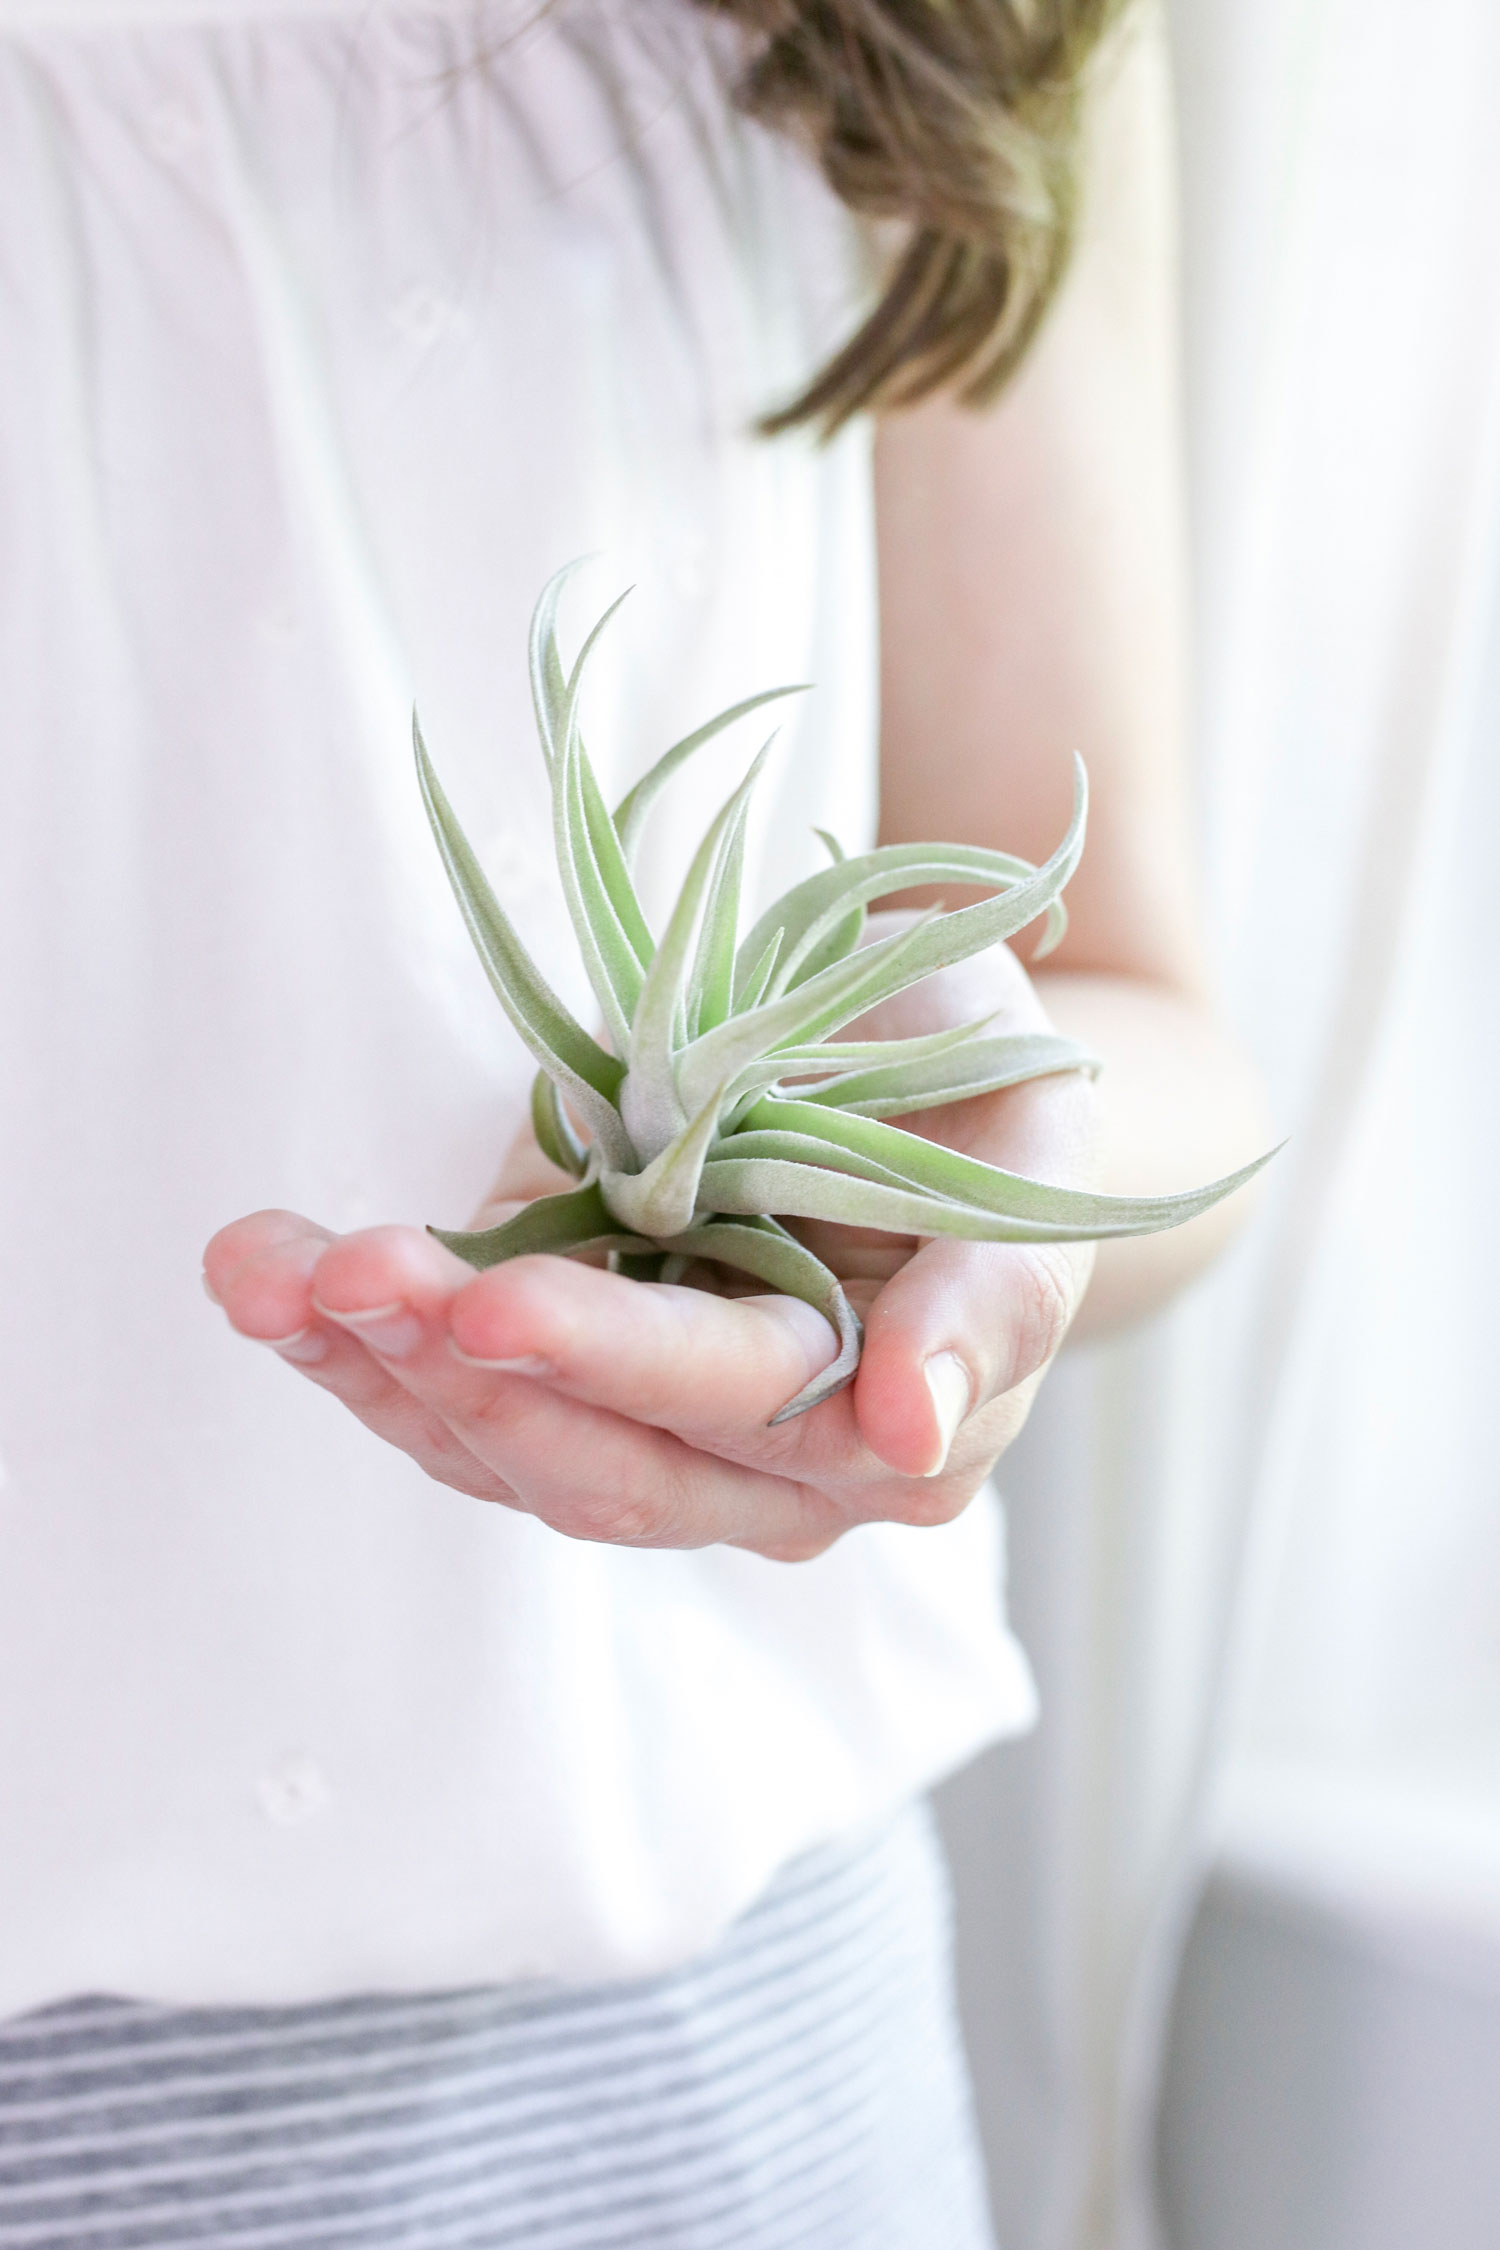 How to care for an air plant